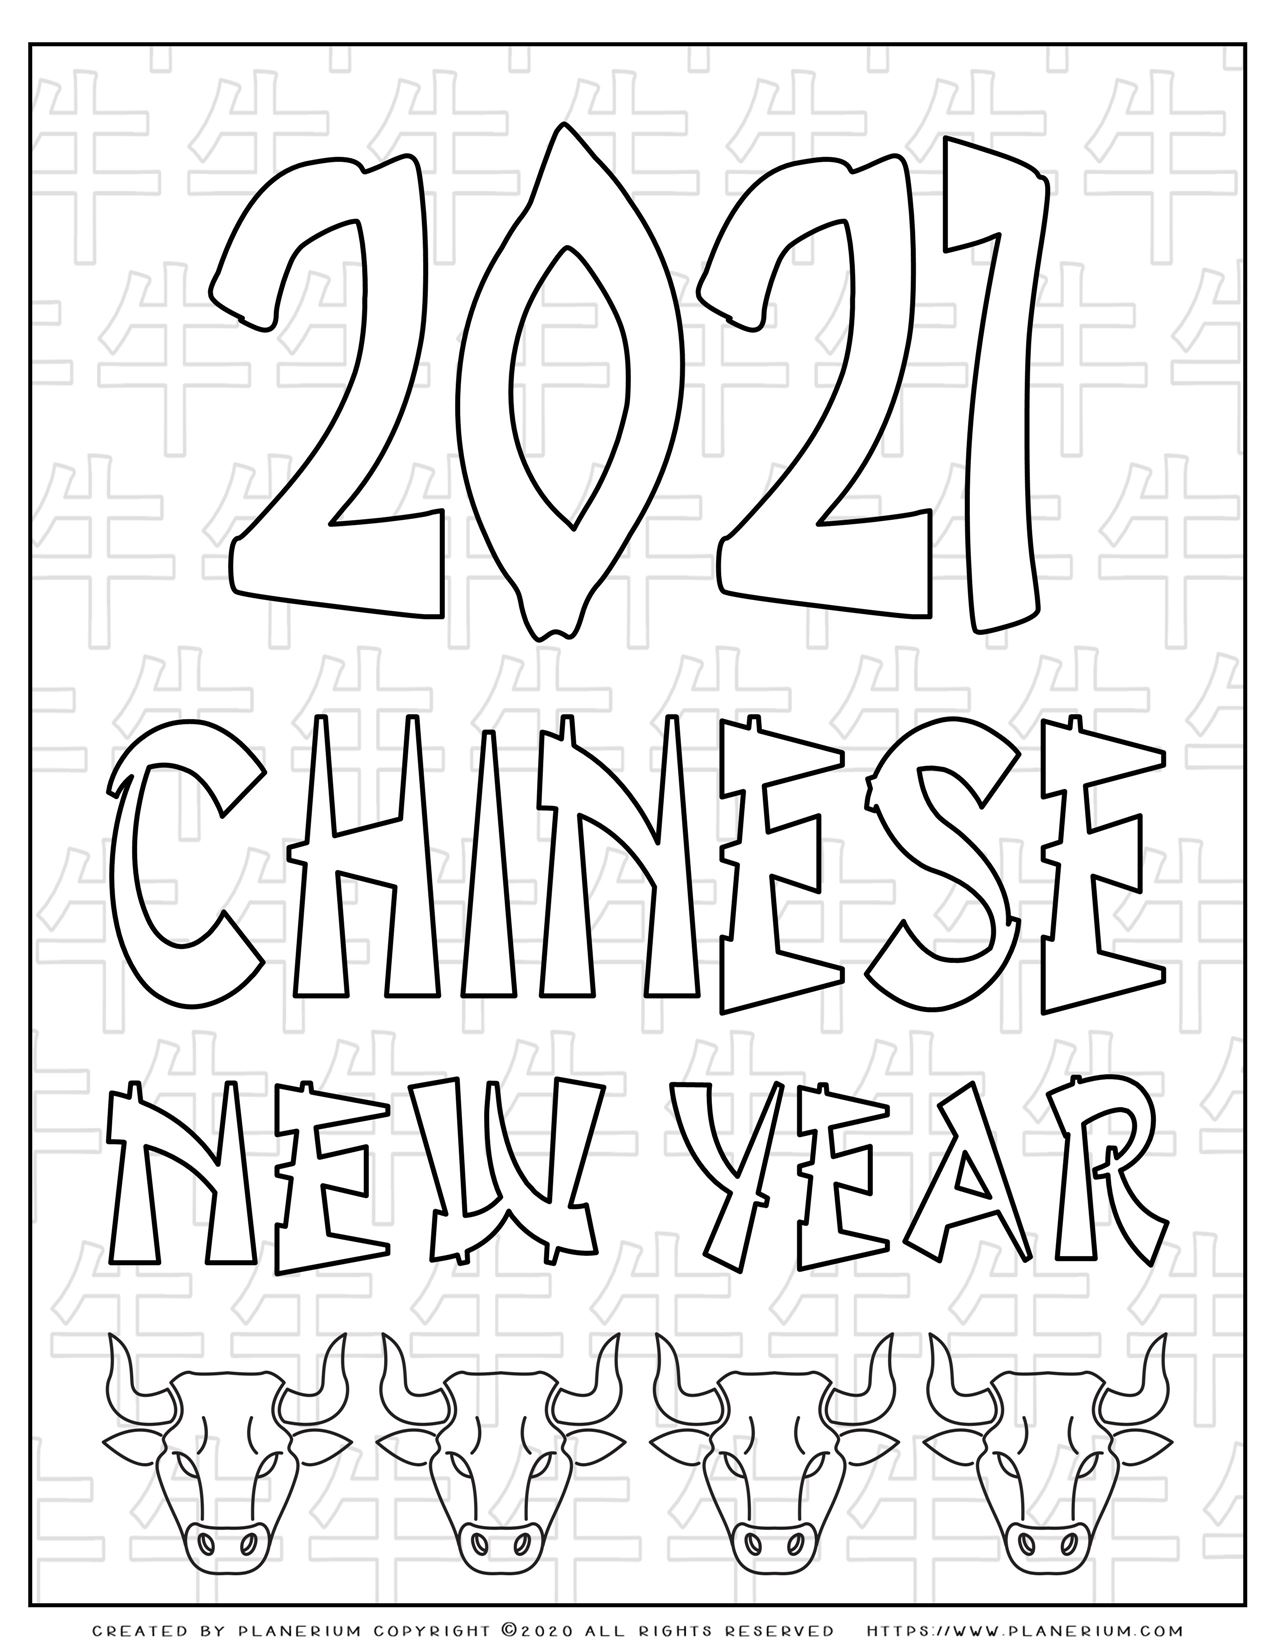 Download Chinese New Year 2021 - Coloring poster | Planerium